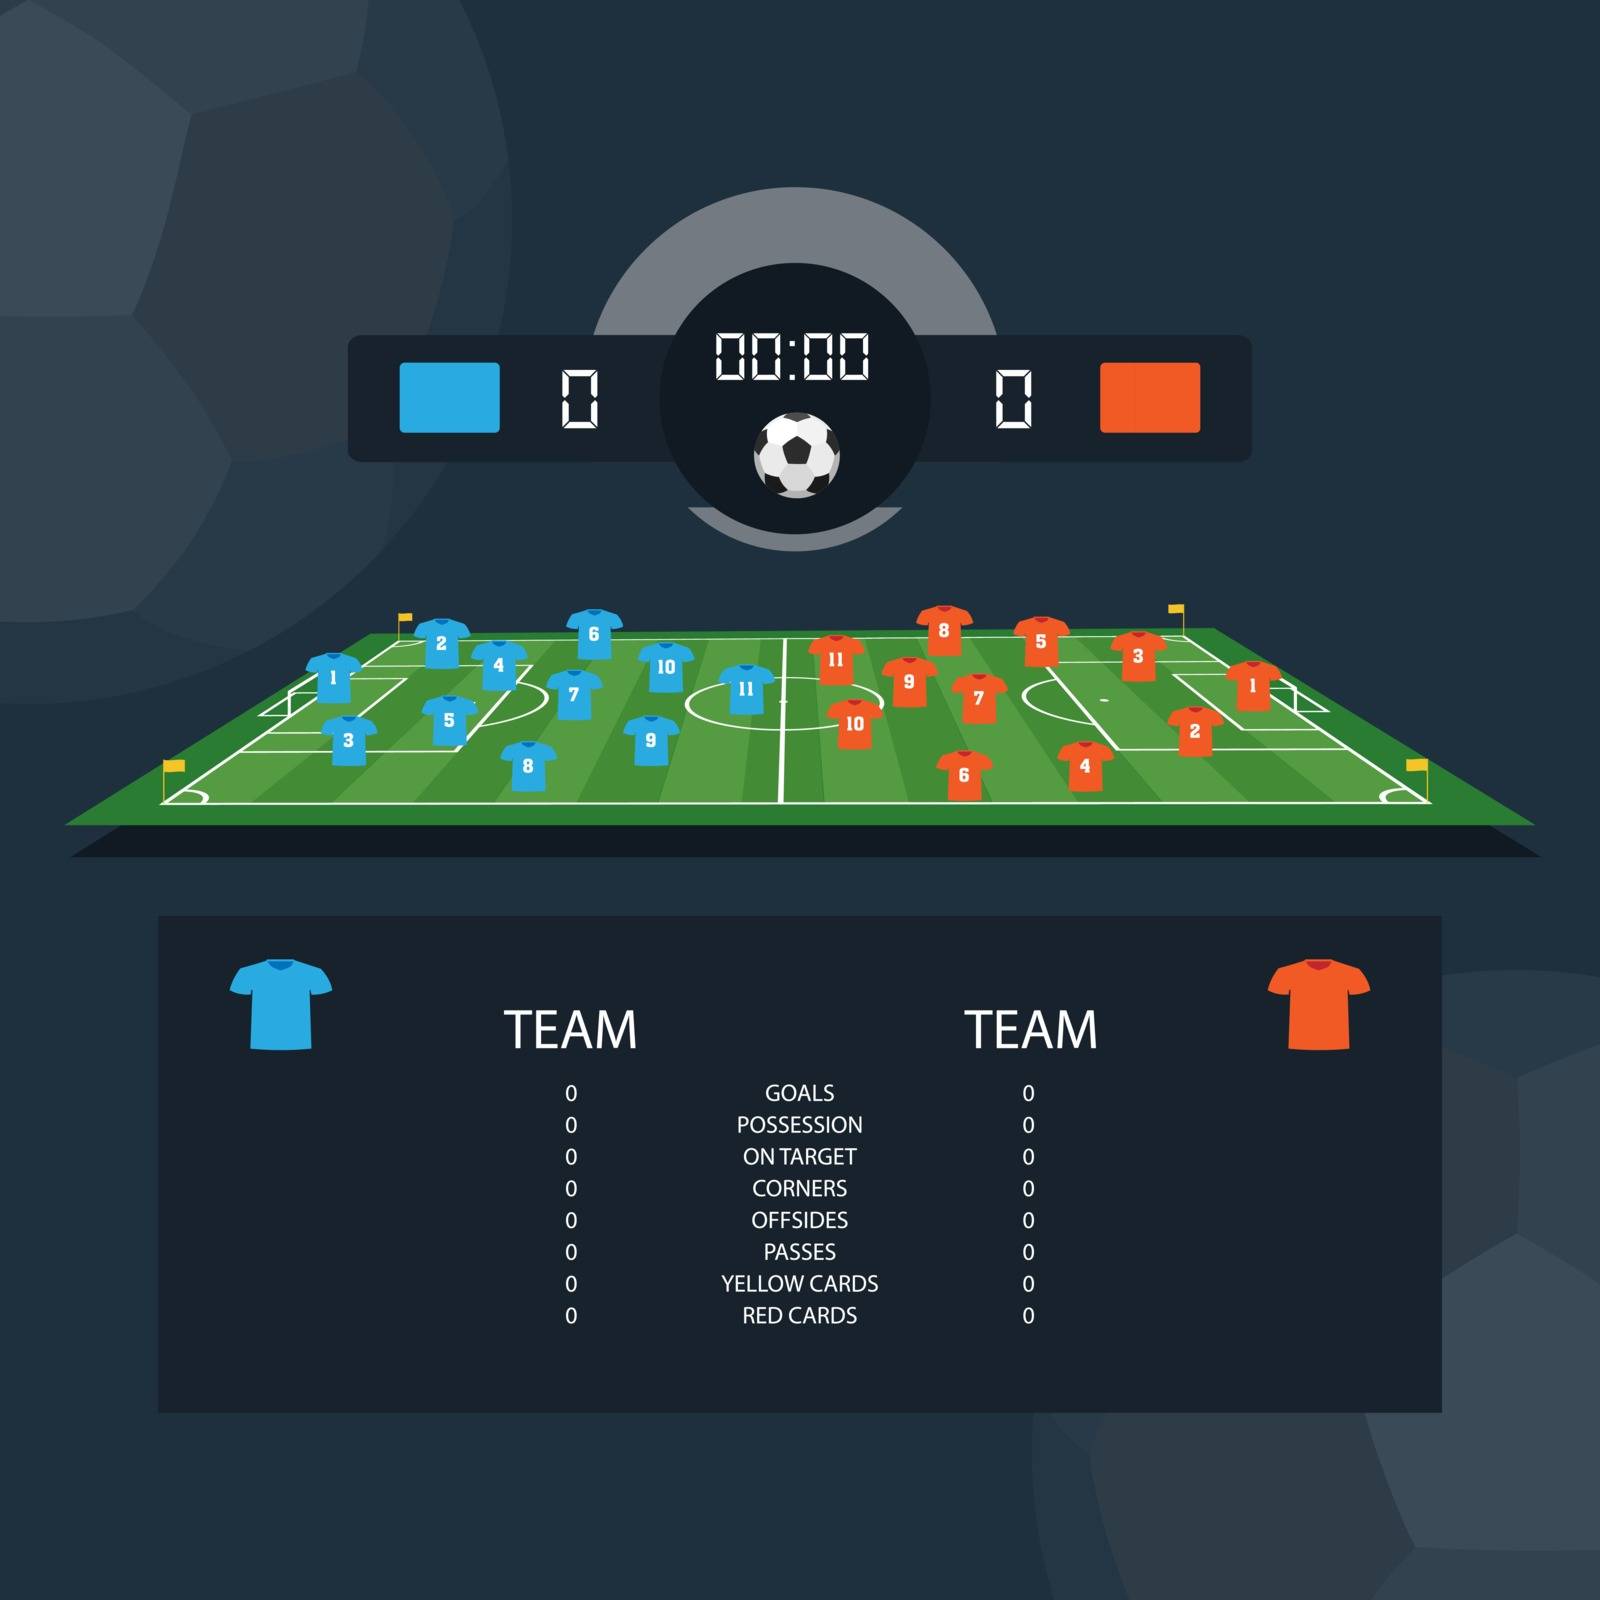 Soccer match scoreboard and statistics plan between two example teams. Flat design by Imaagio